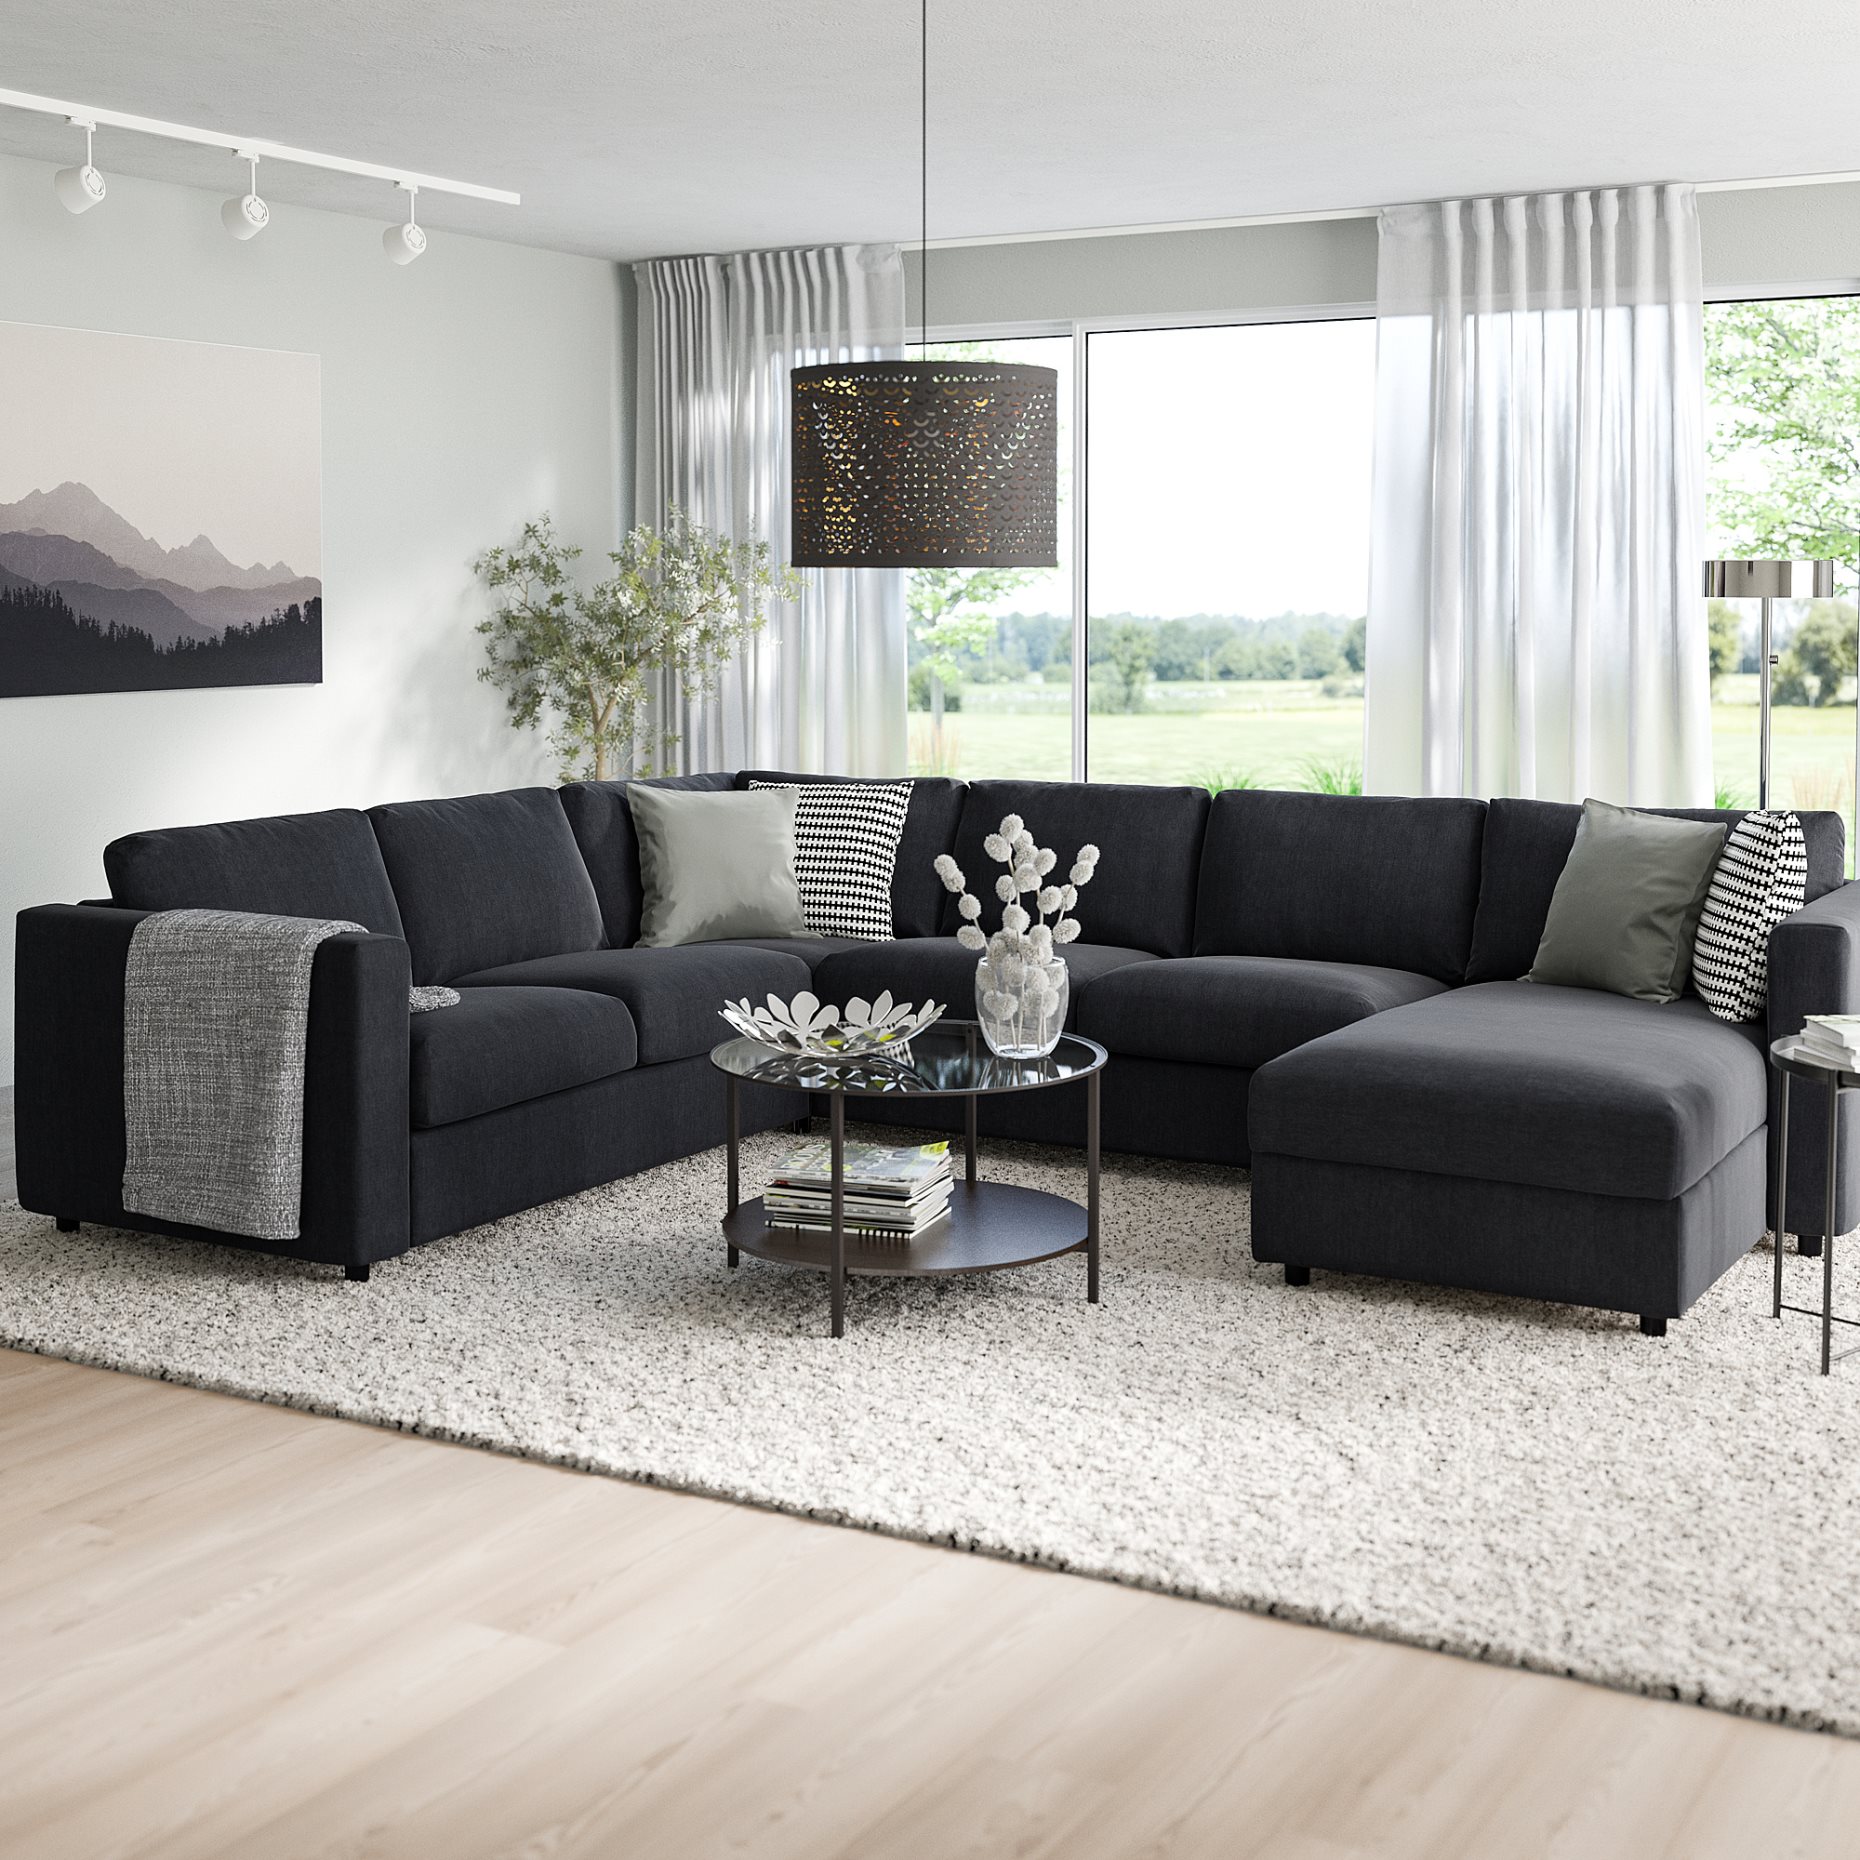 VIMLE, corner sofa-bed, 5-seat with chaise longue, 895.371.68